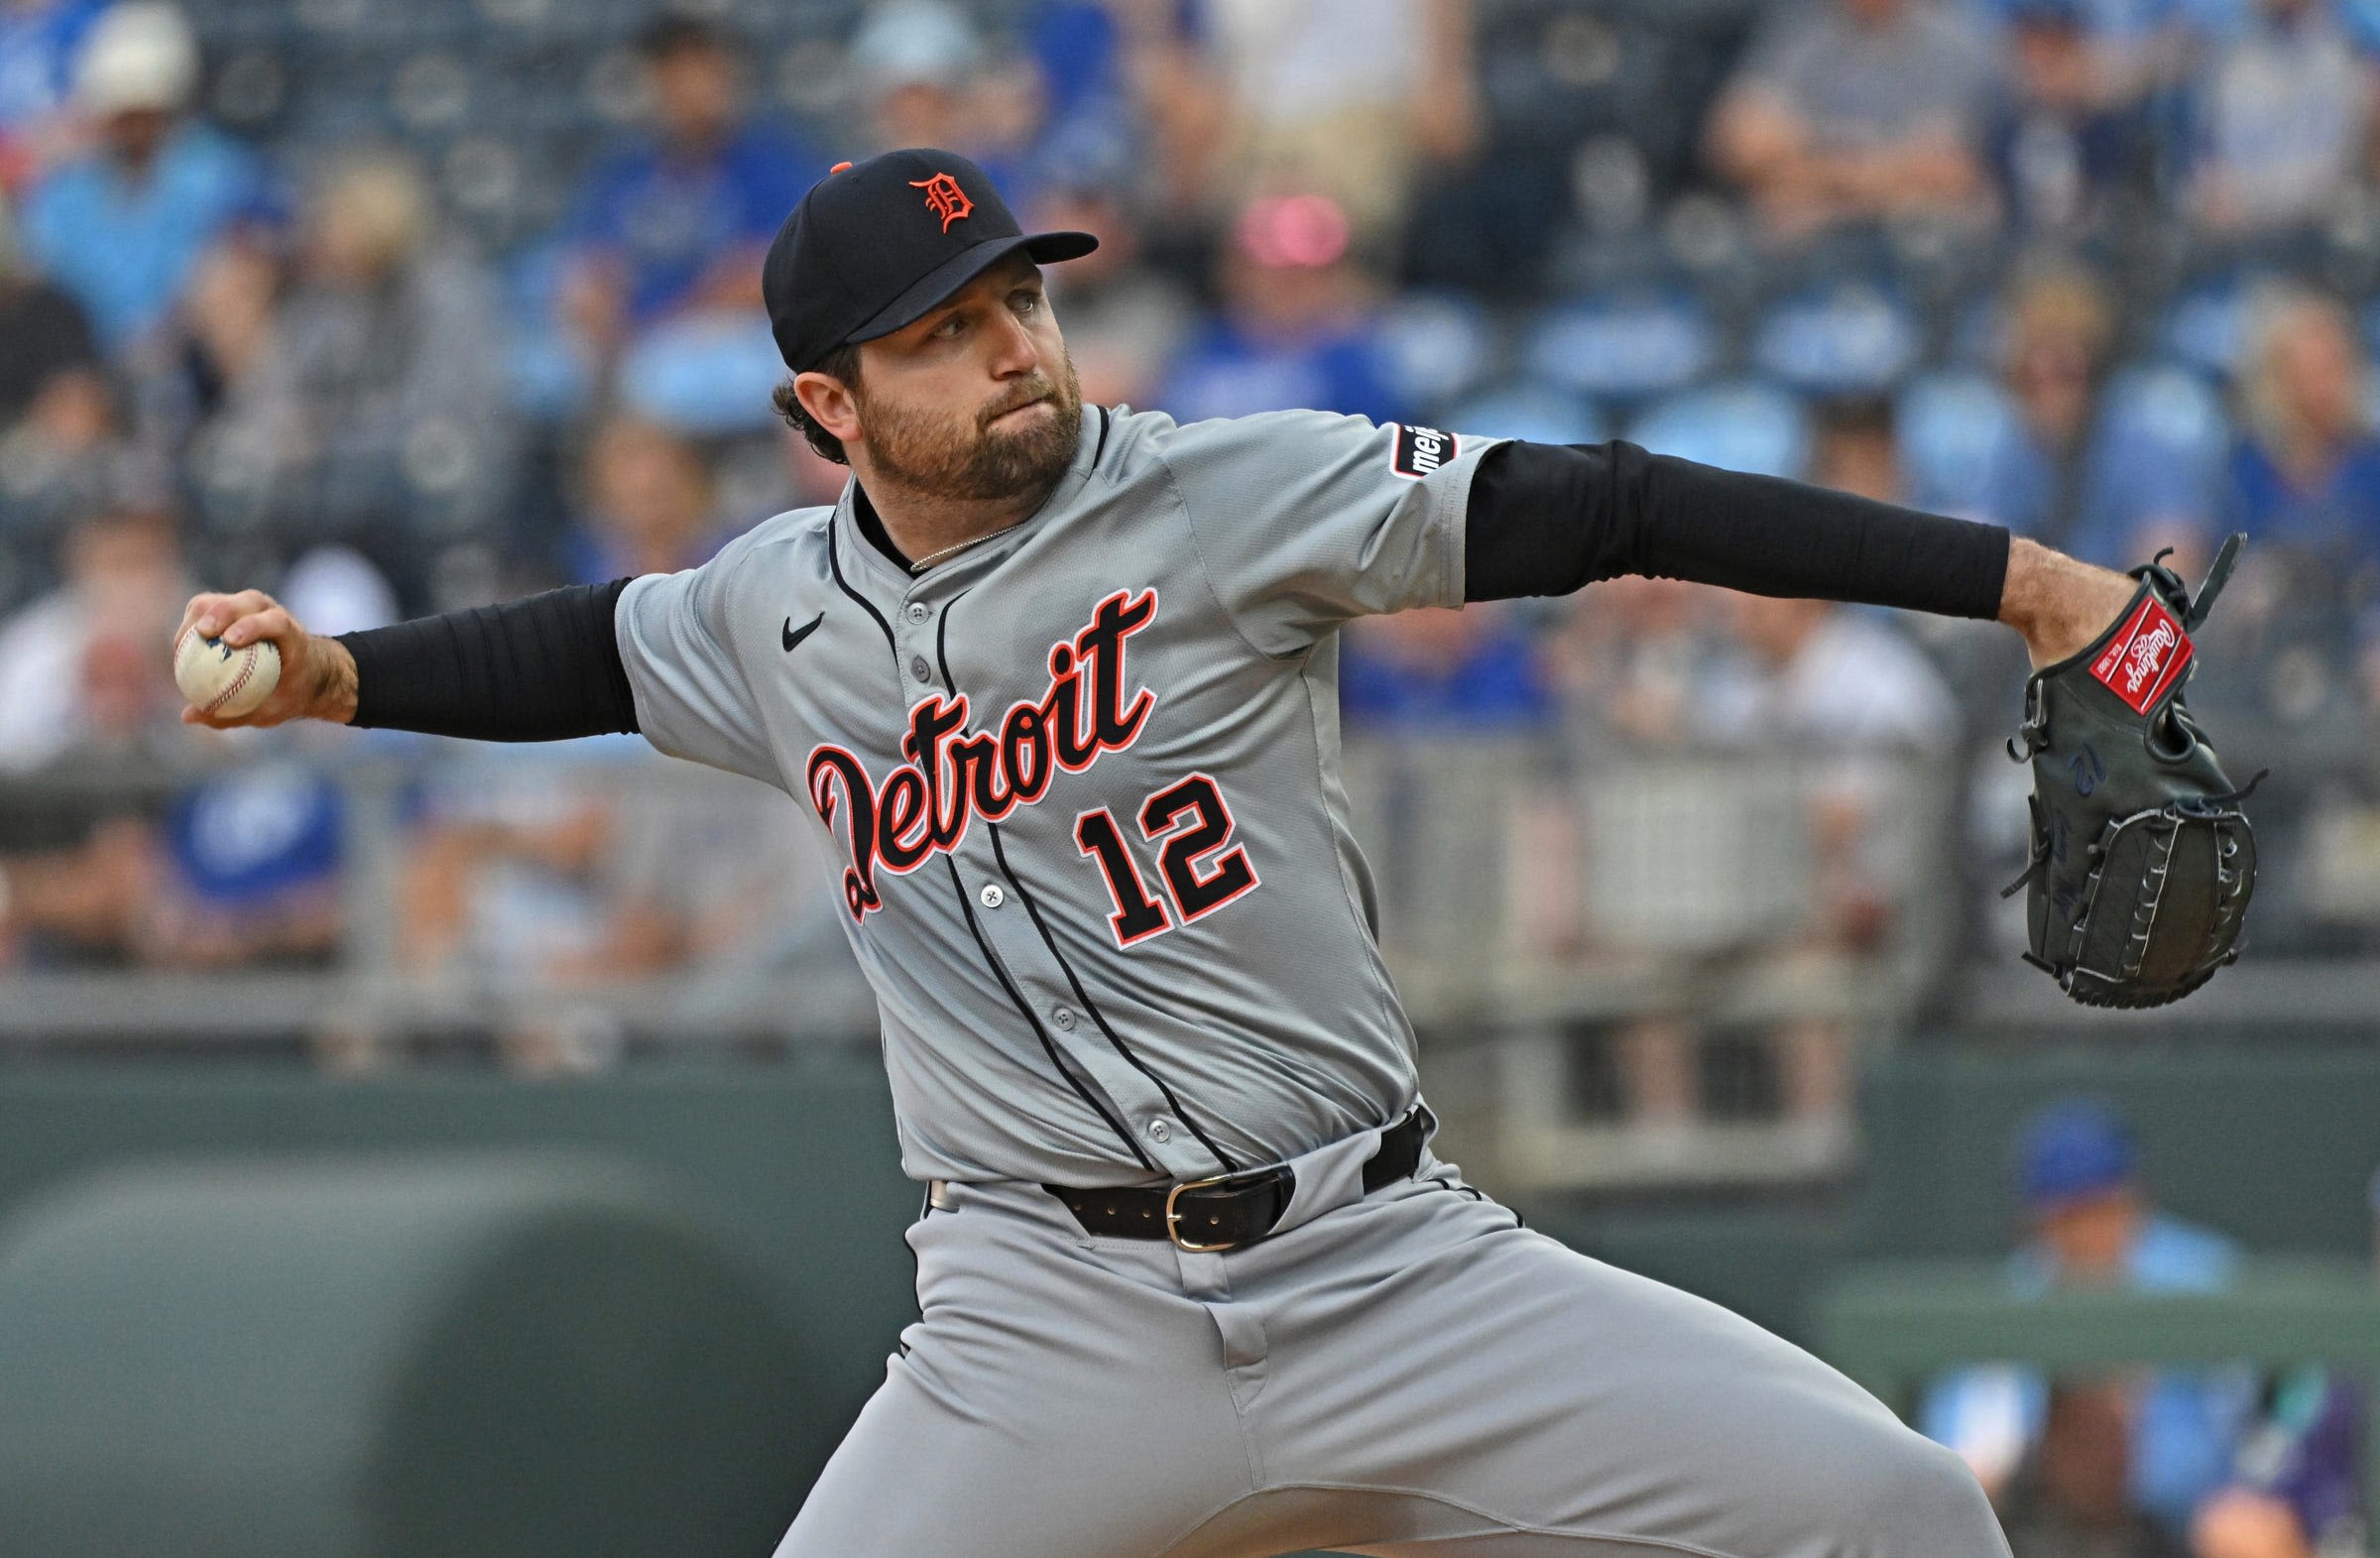 Detroit Tigers vs. Boston Red Sox: Spencer Torkelson benched again as cold spell continues